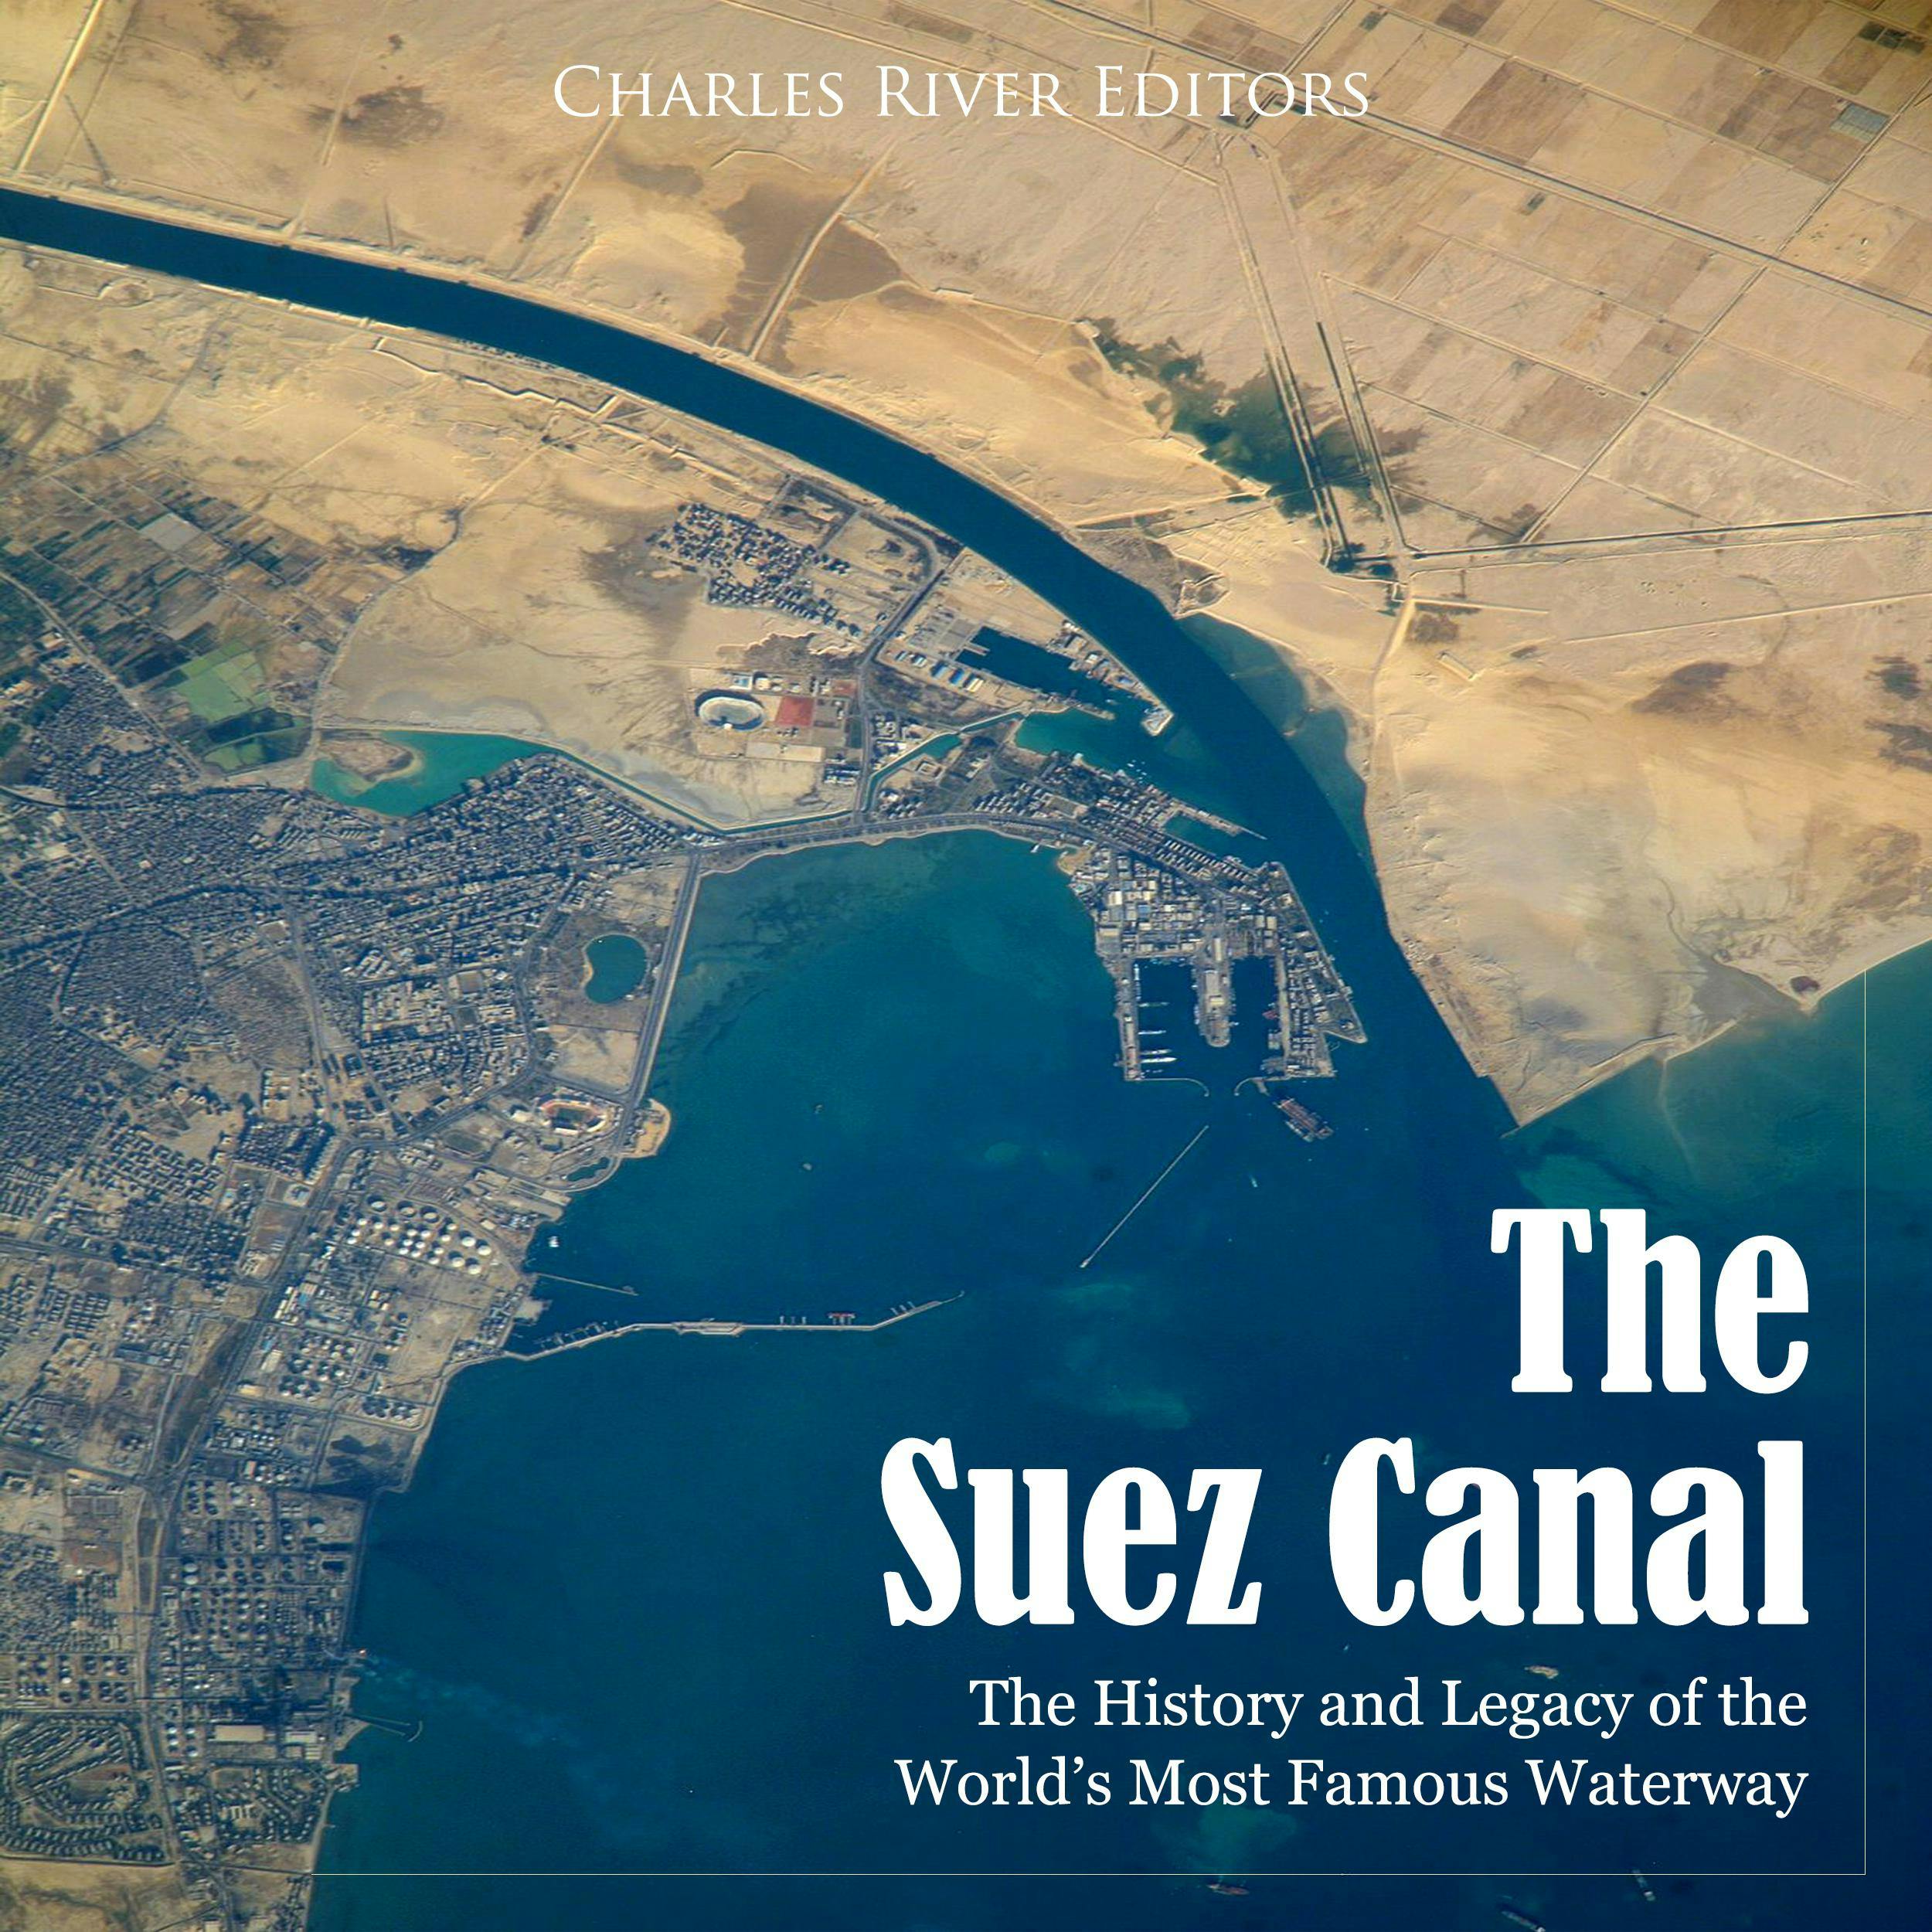 The Suez Canal: The History and Legacy of the World’s Most Famous Waterway - Charles River Editors